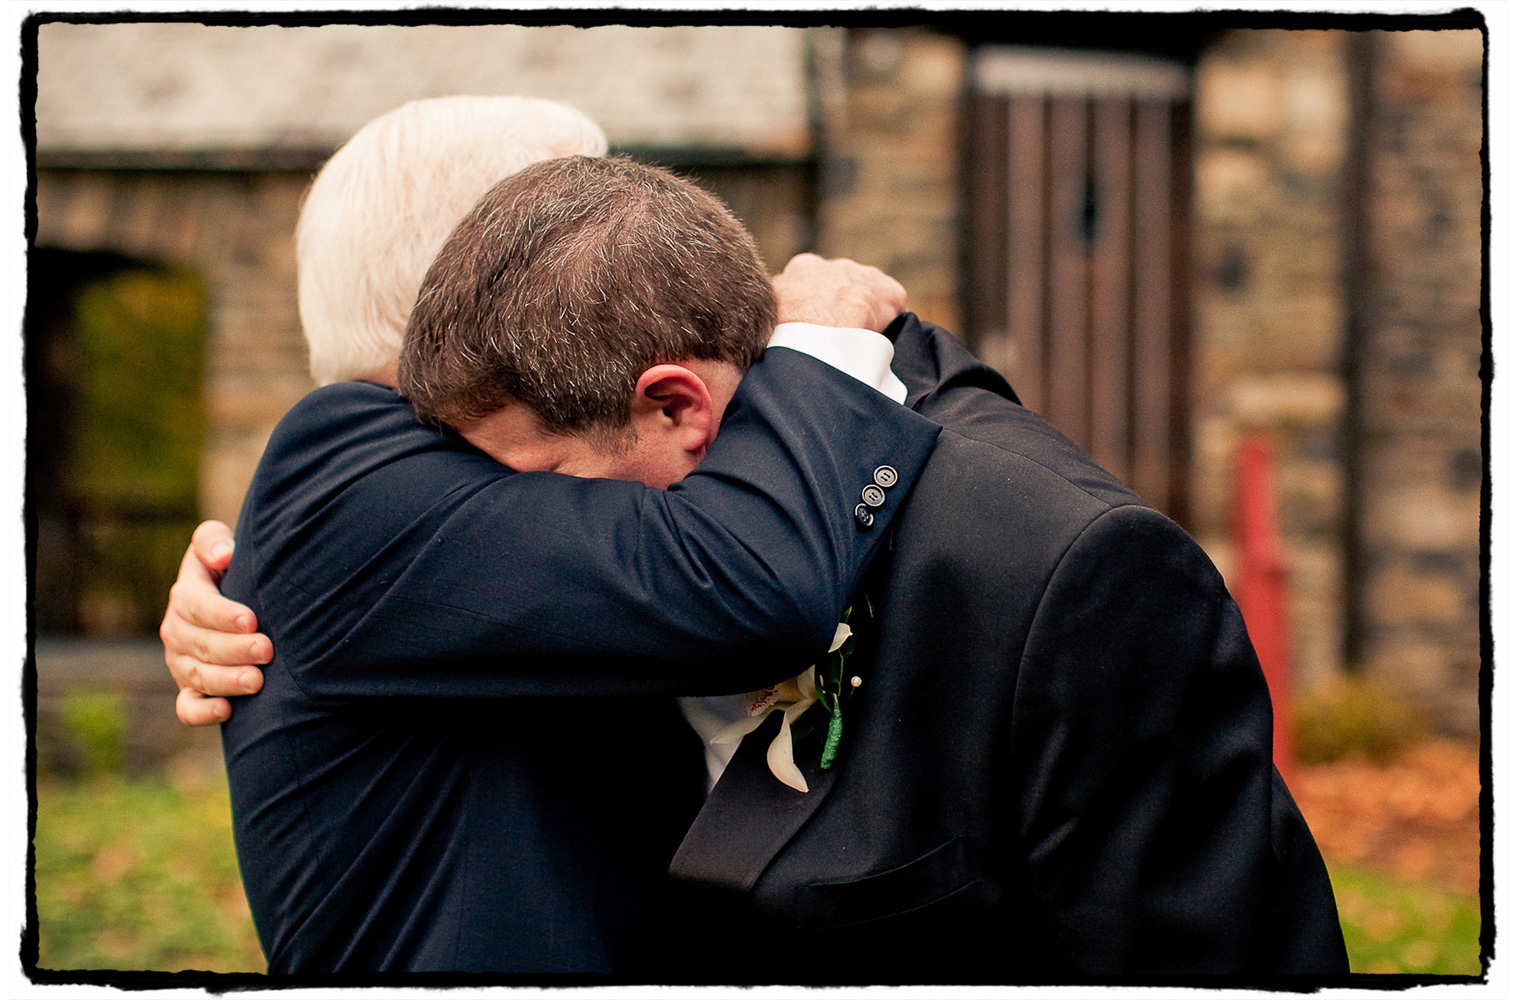 This groom shares an emotional hug with his father after marrying the love of his life.